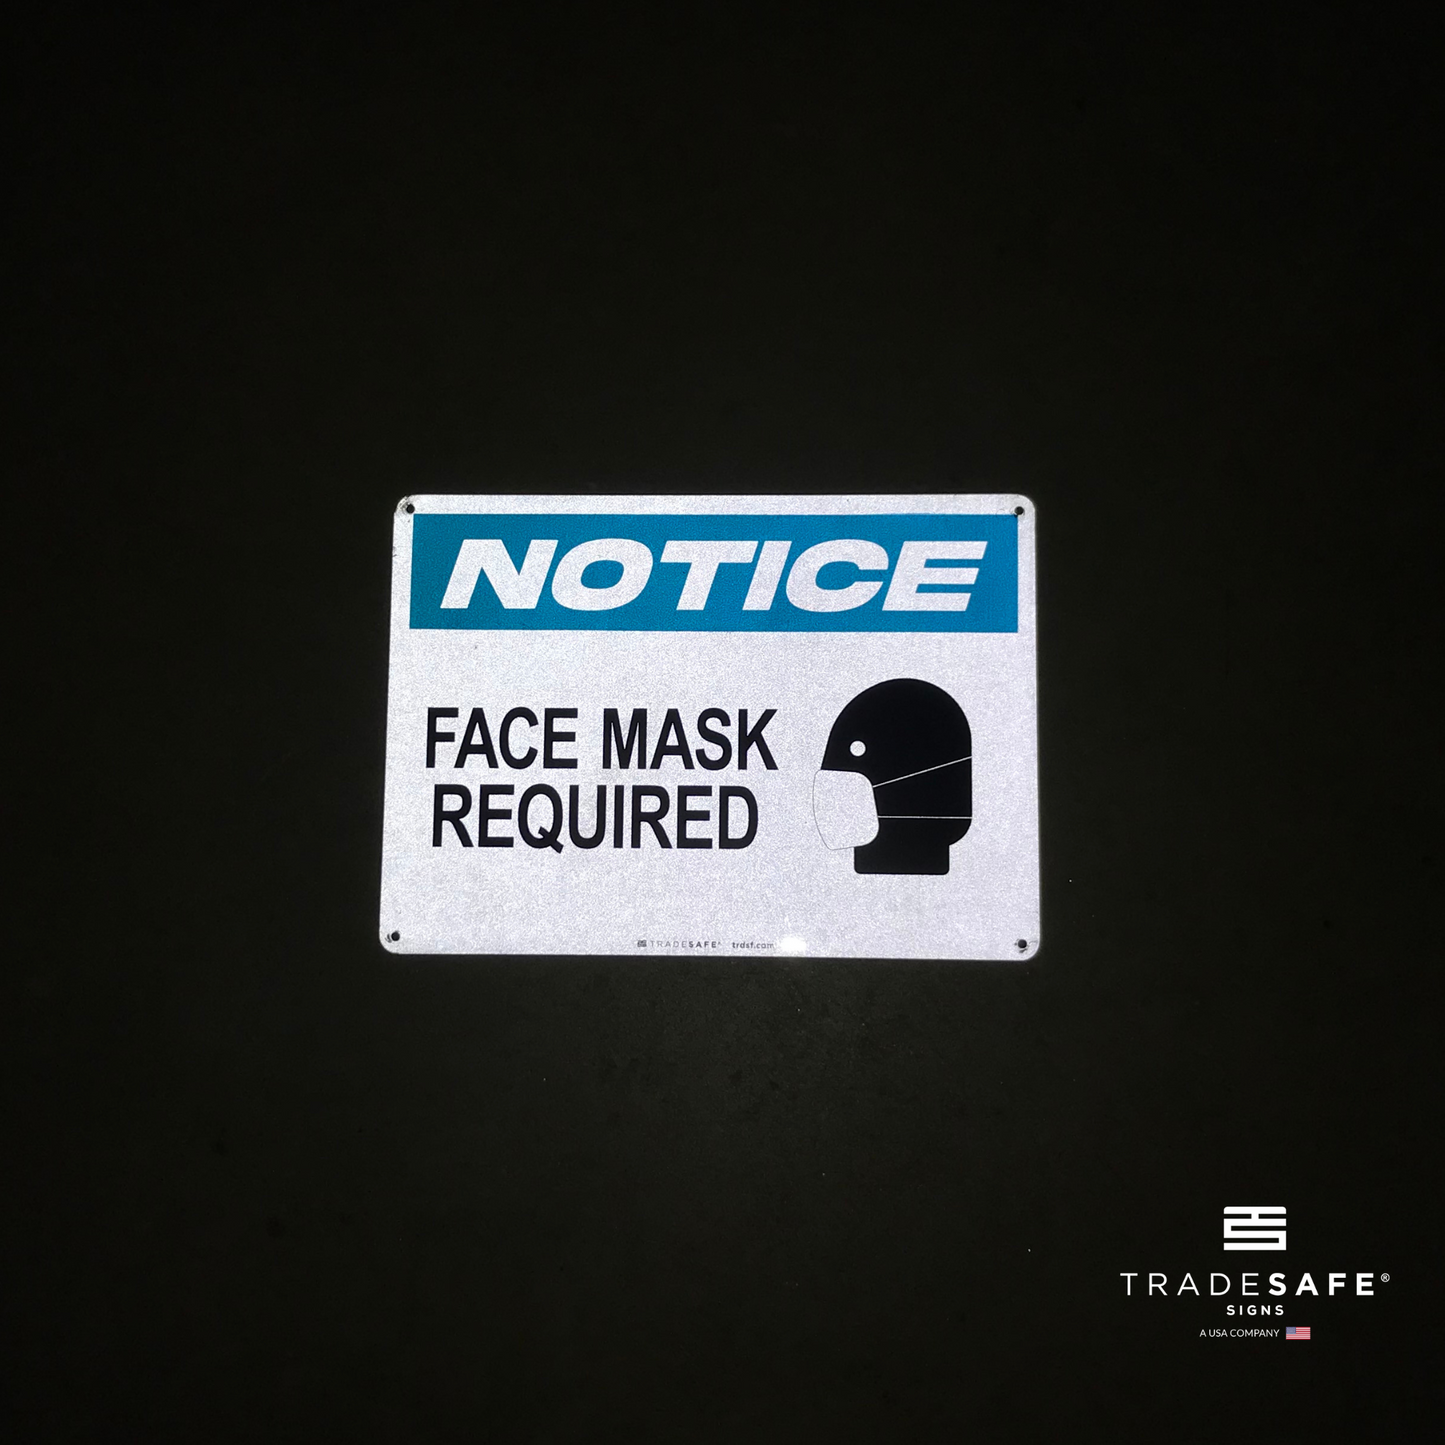 reflective attribute of face mask required sign on black background